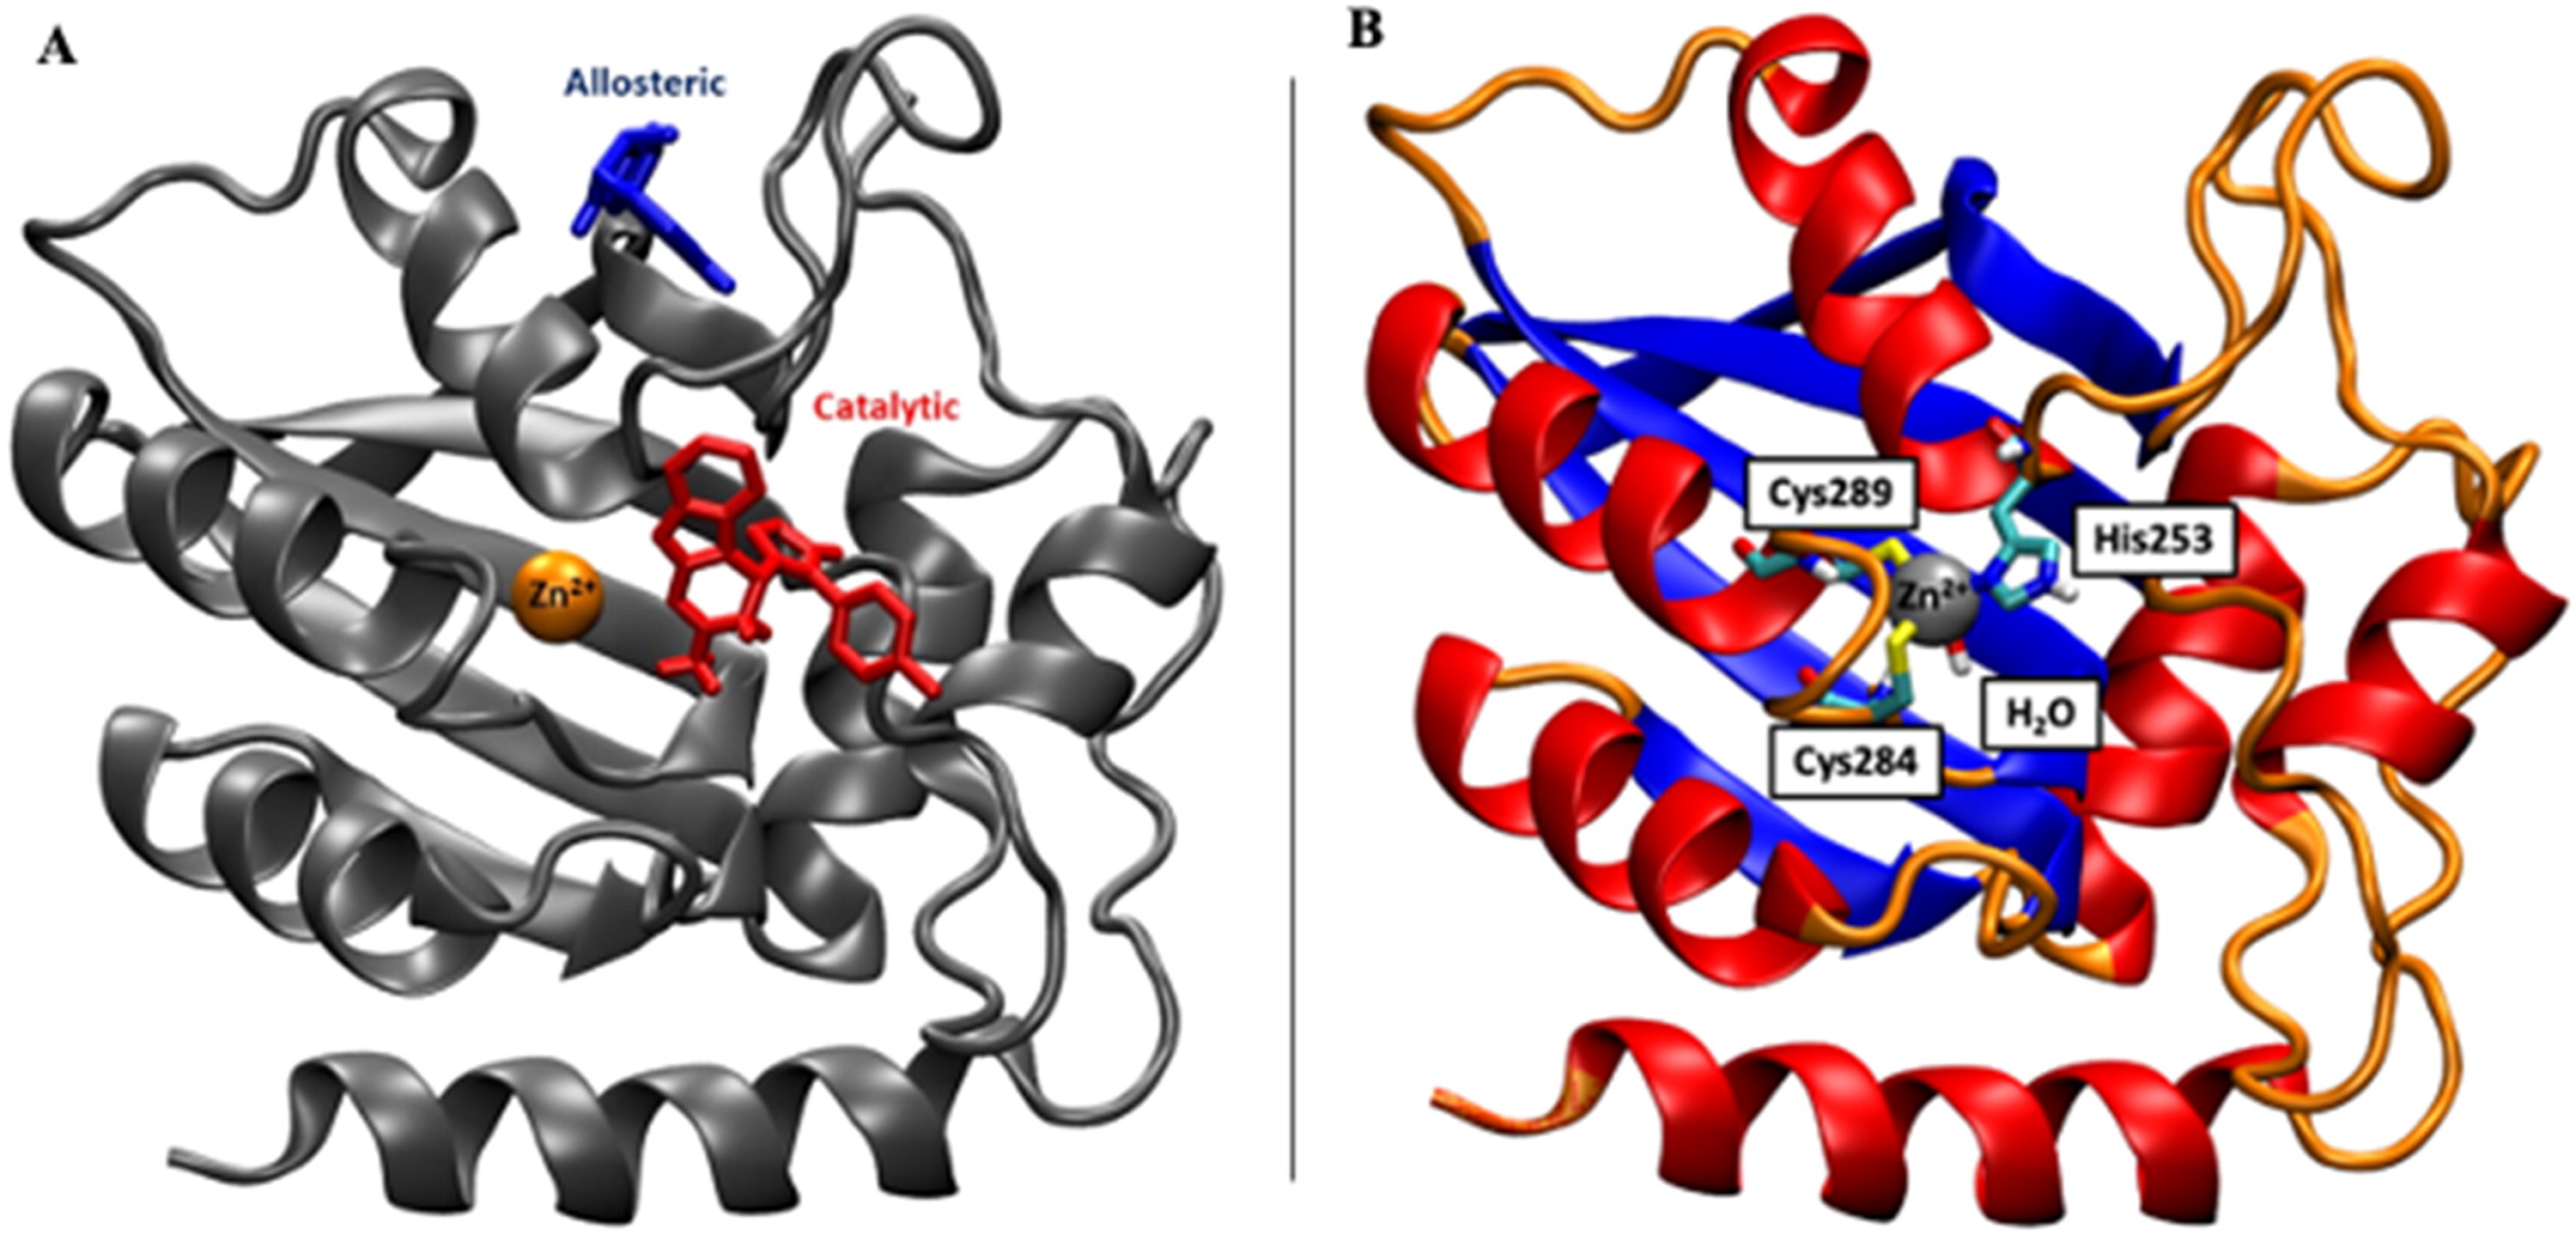 left: catalytic and allosteric binding sites, right: secondary structure of APOBEC3B